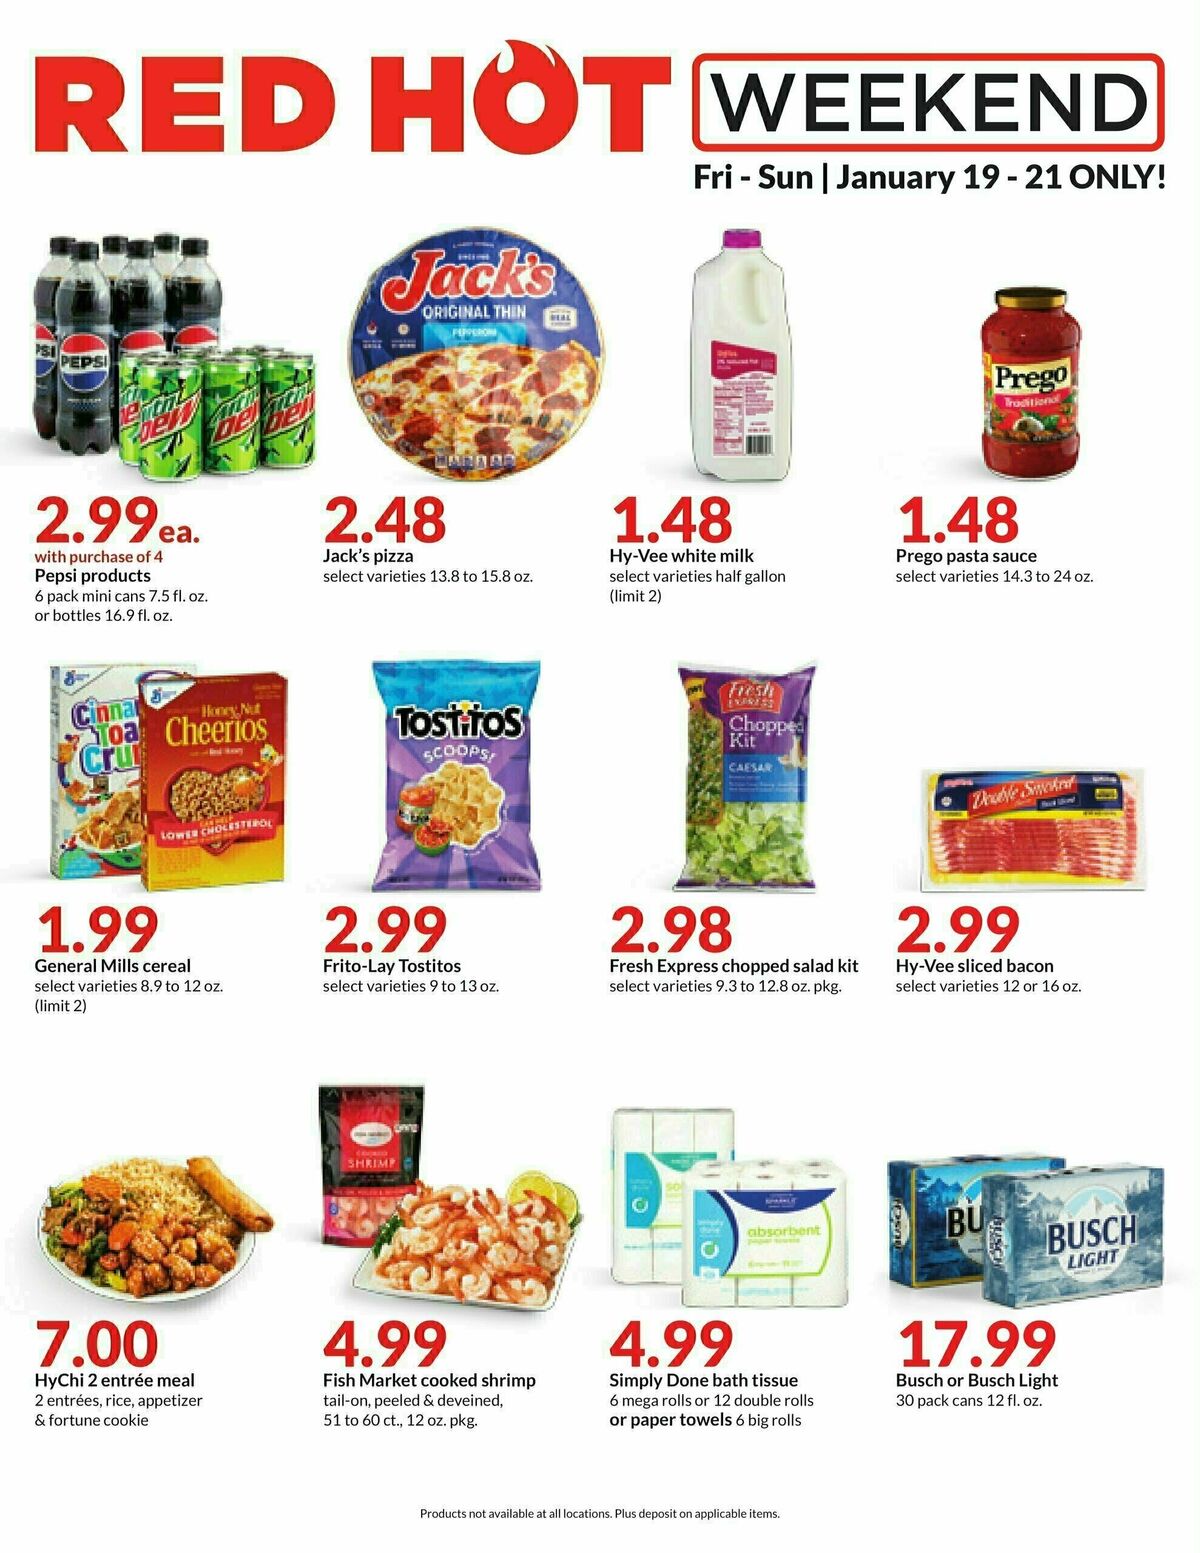 HyVee Red Hot Weekend Deals & Ads from January 19